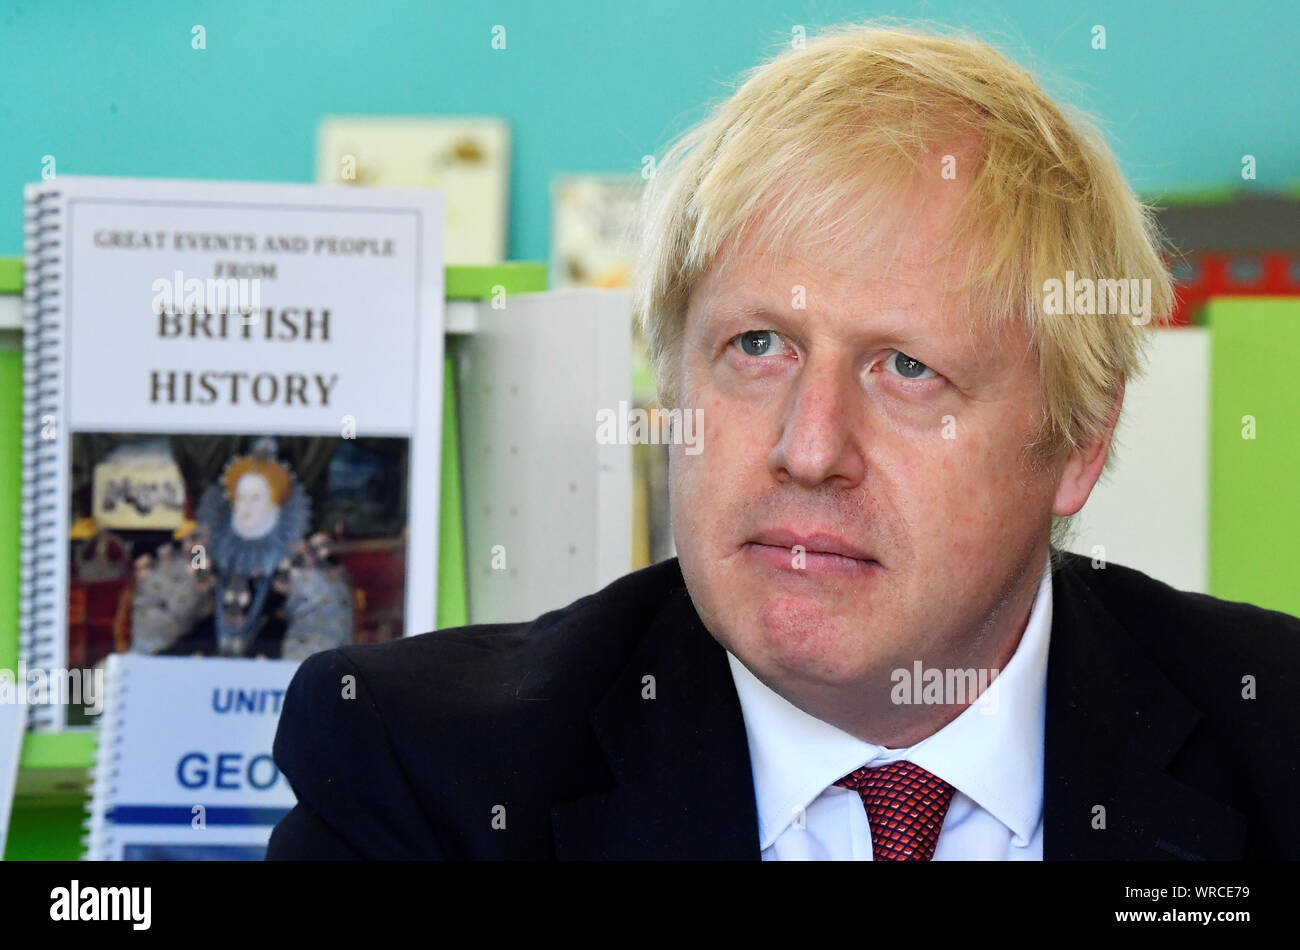 Prime Minister Boris Johnson speaks with year four and year six pupils during a visit to Pimlico Primary school in South West London, to meet staff and students and launch an education drive which could see up to 30 new free schools established. Stock Photo